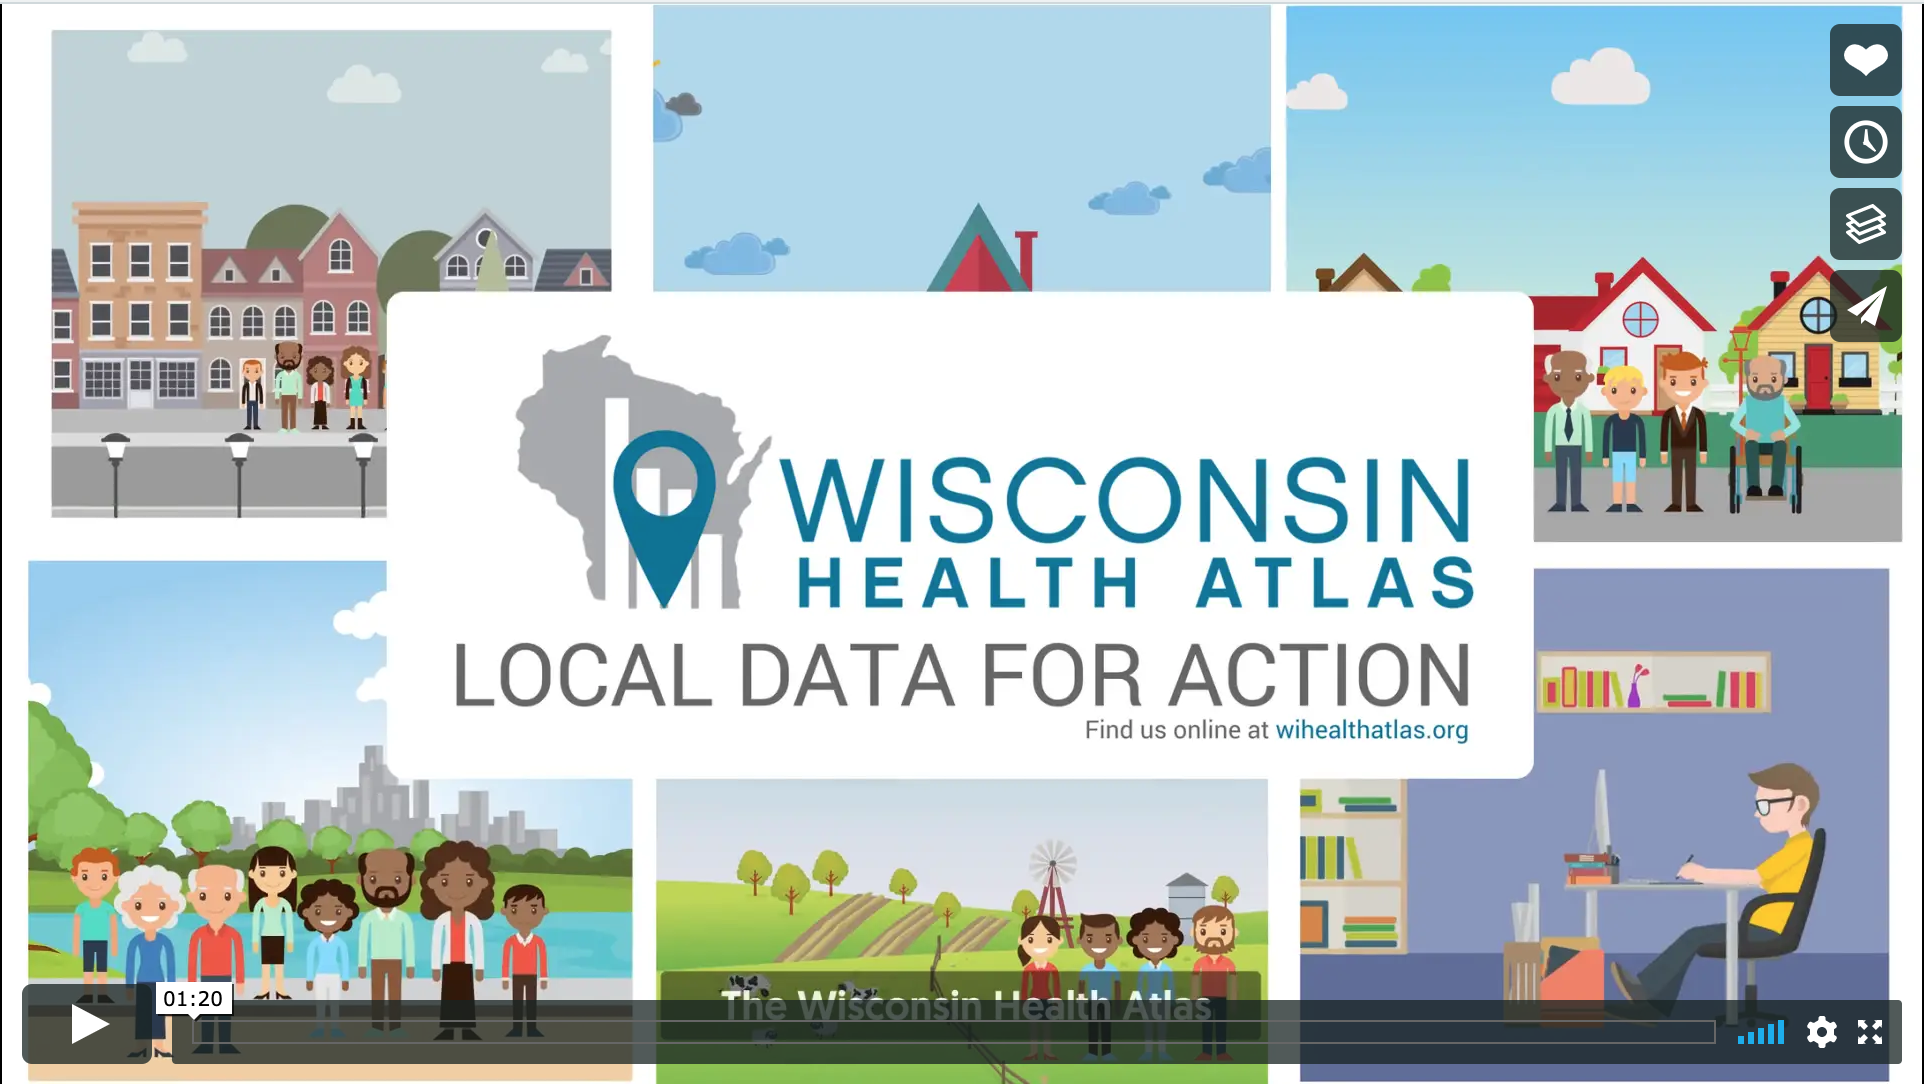 About the Wisconsin Health Atlas